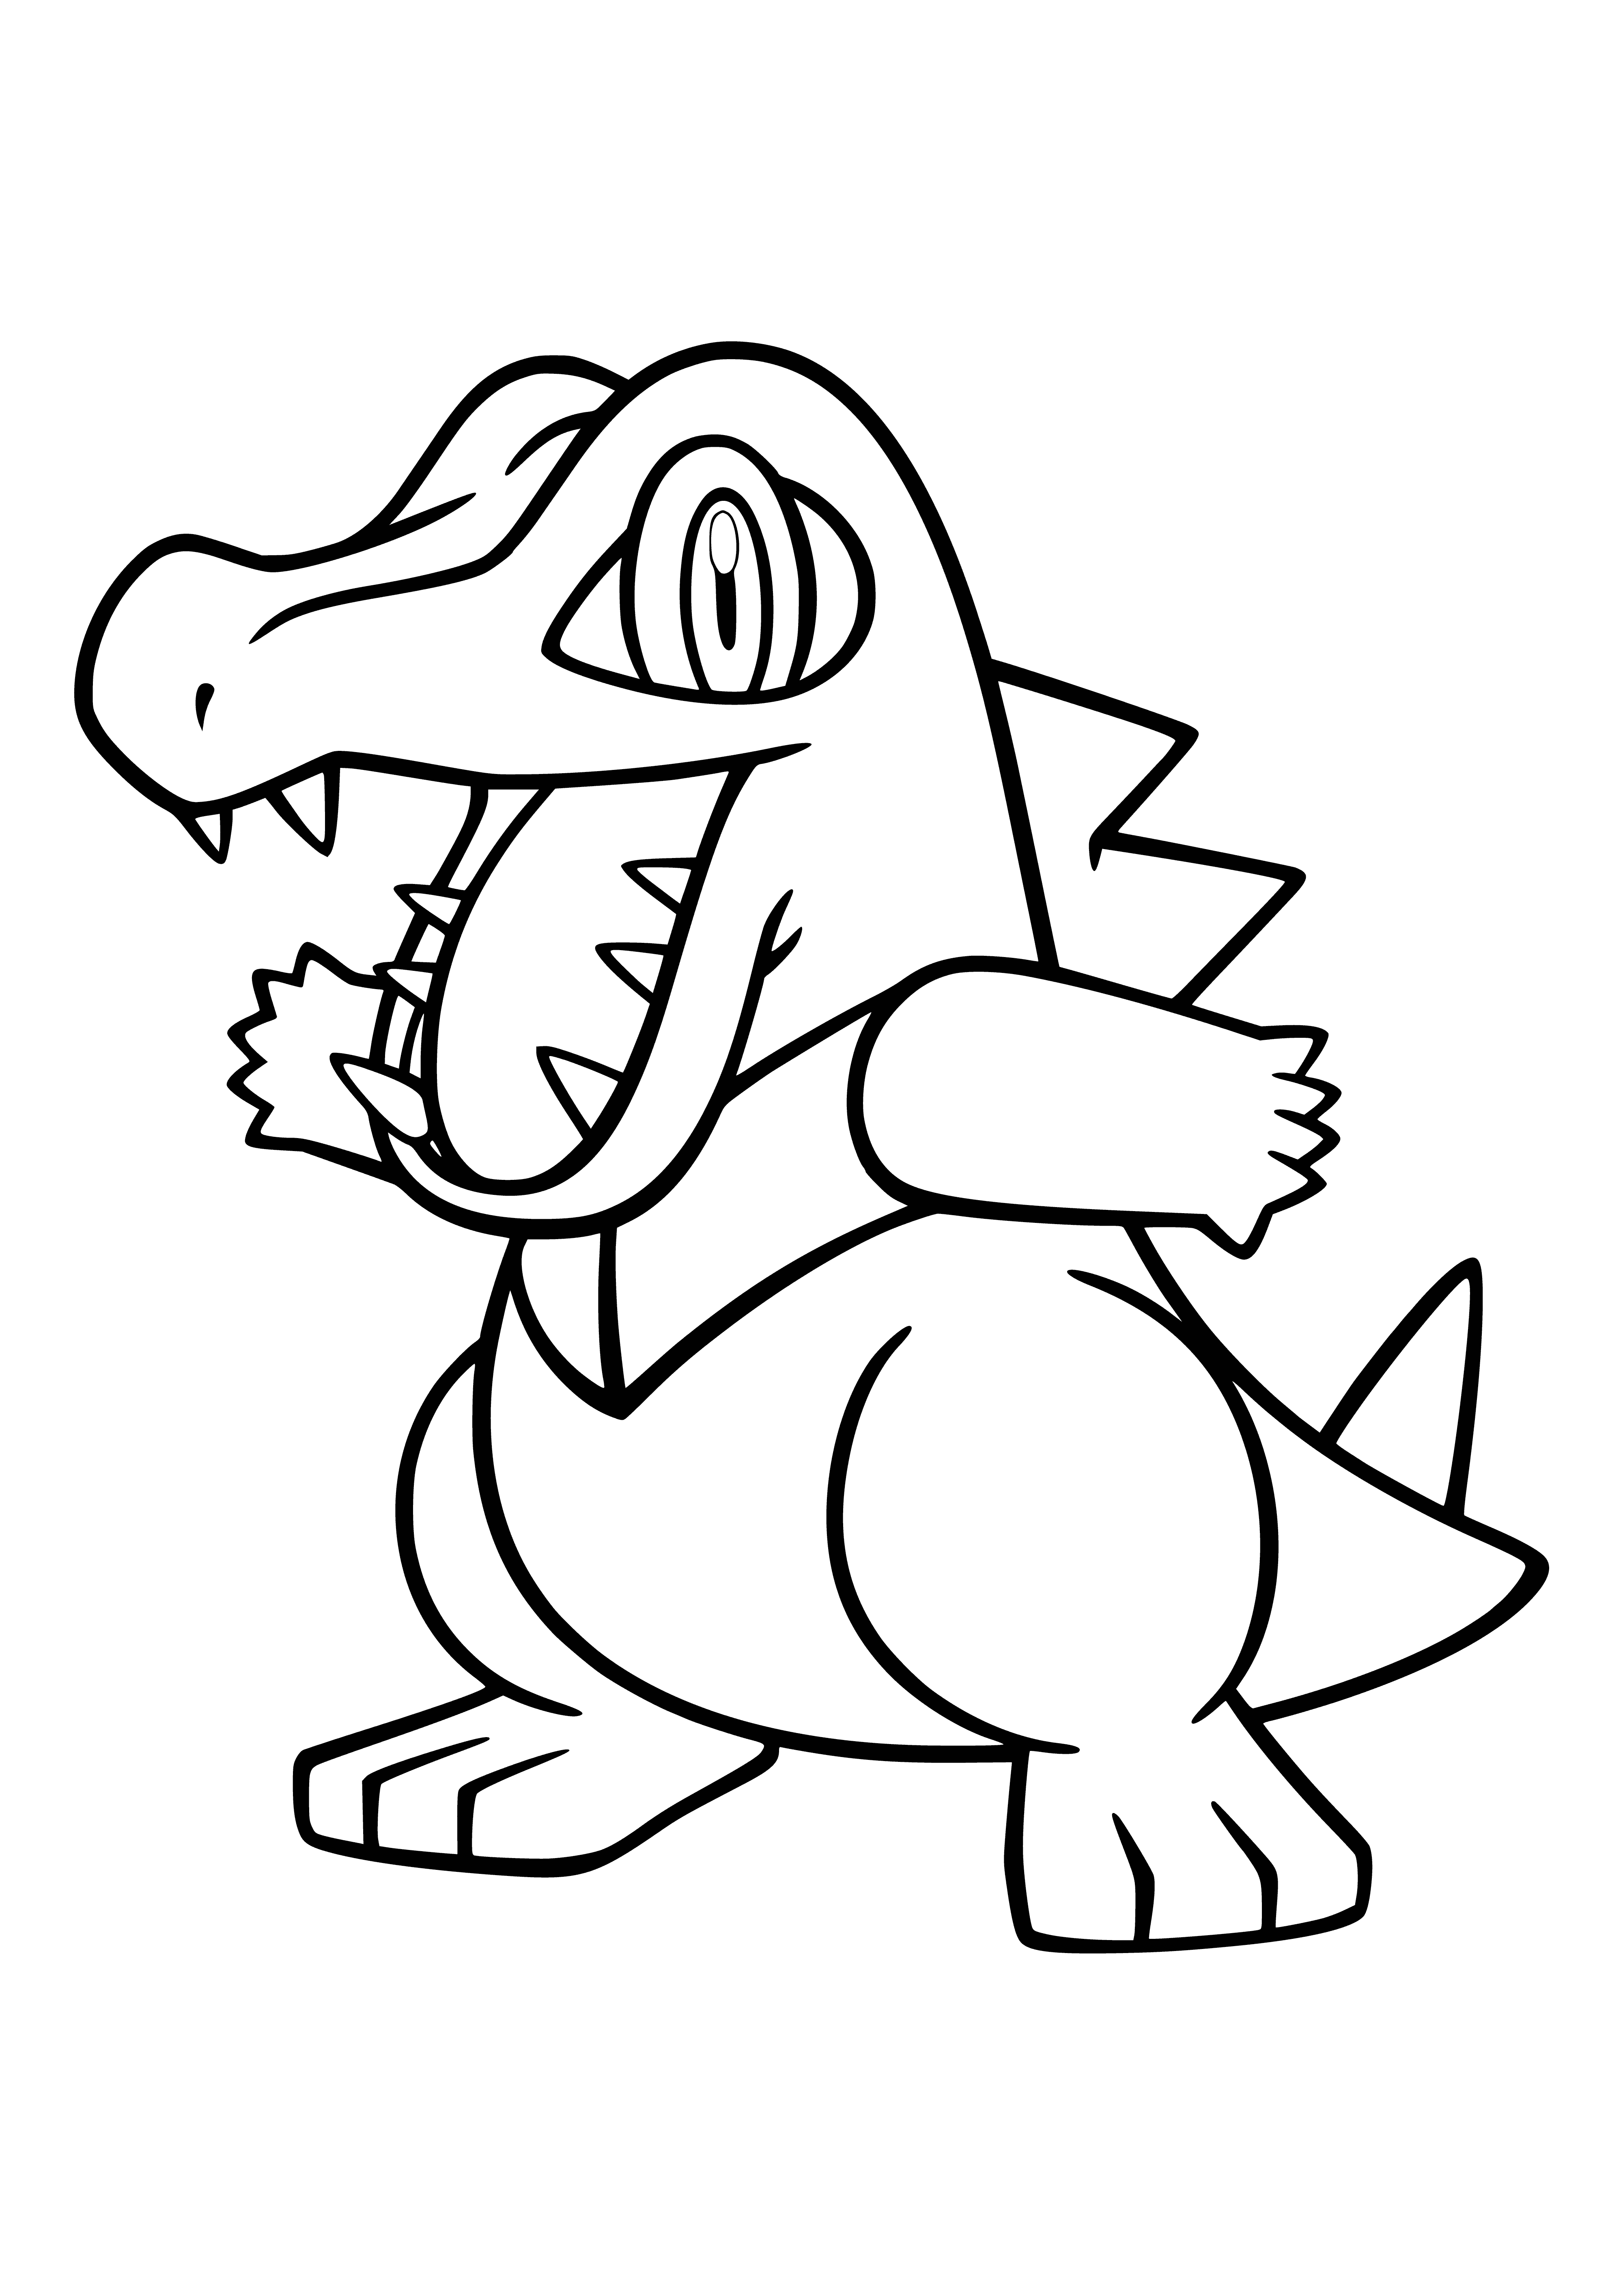 Pokemon Totodile coloring page